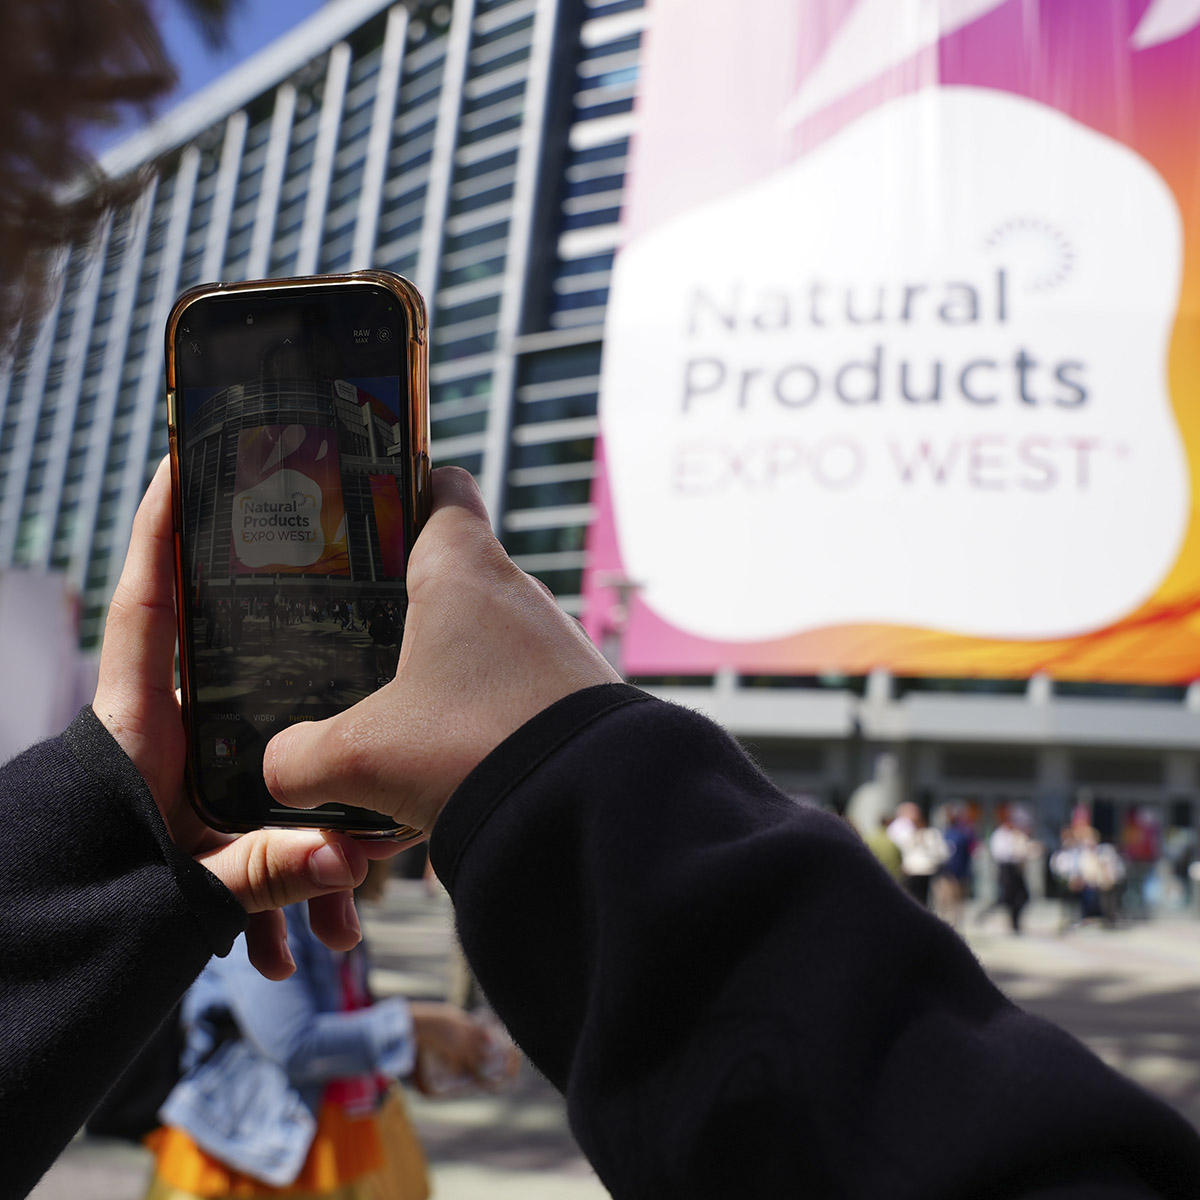 Some shots from @NatProdExpo  #ExpoWest - Part 1!